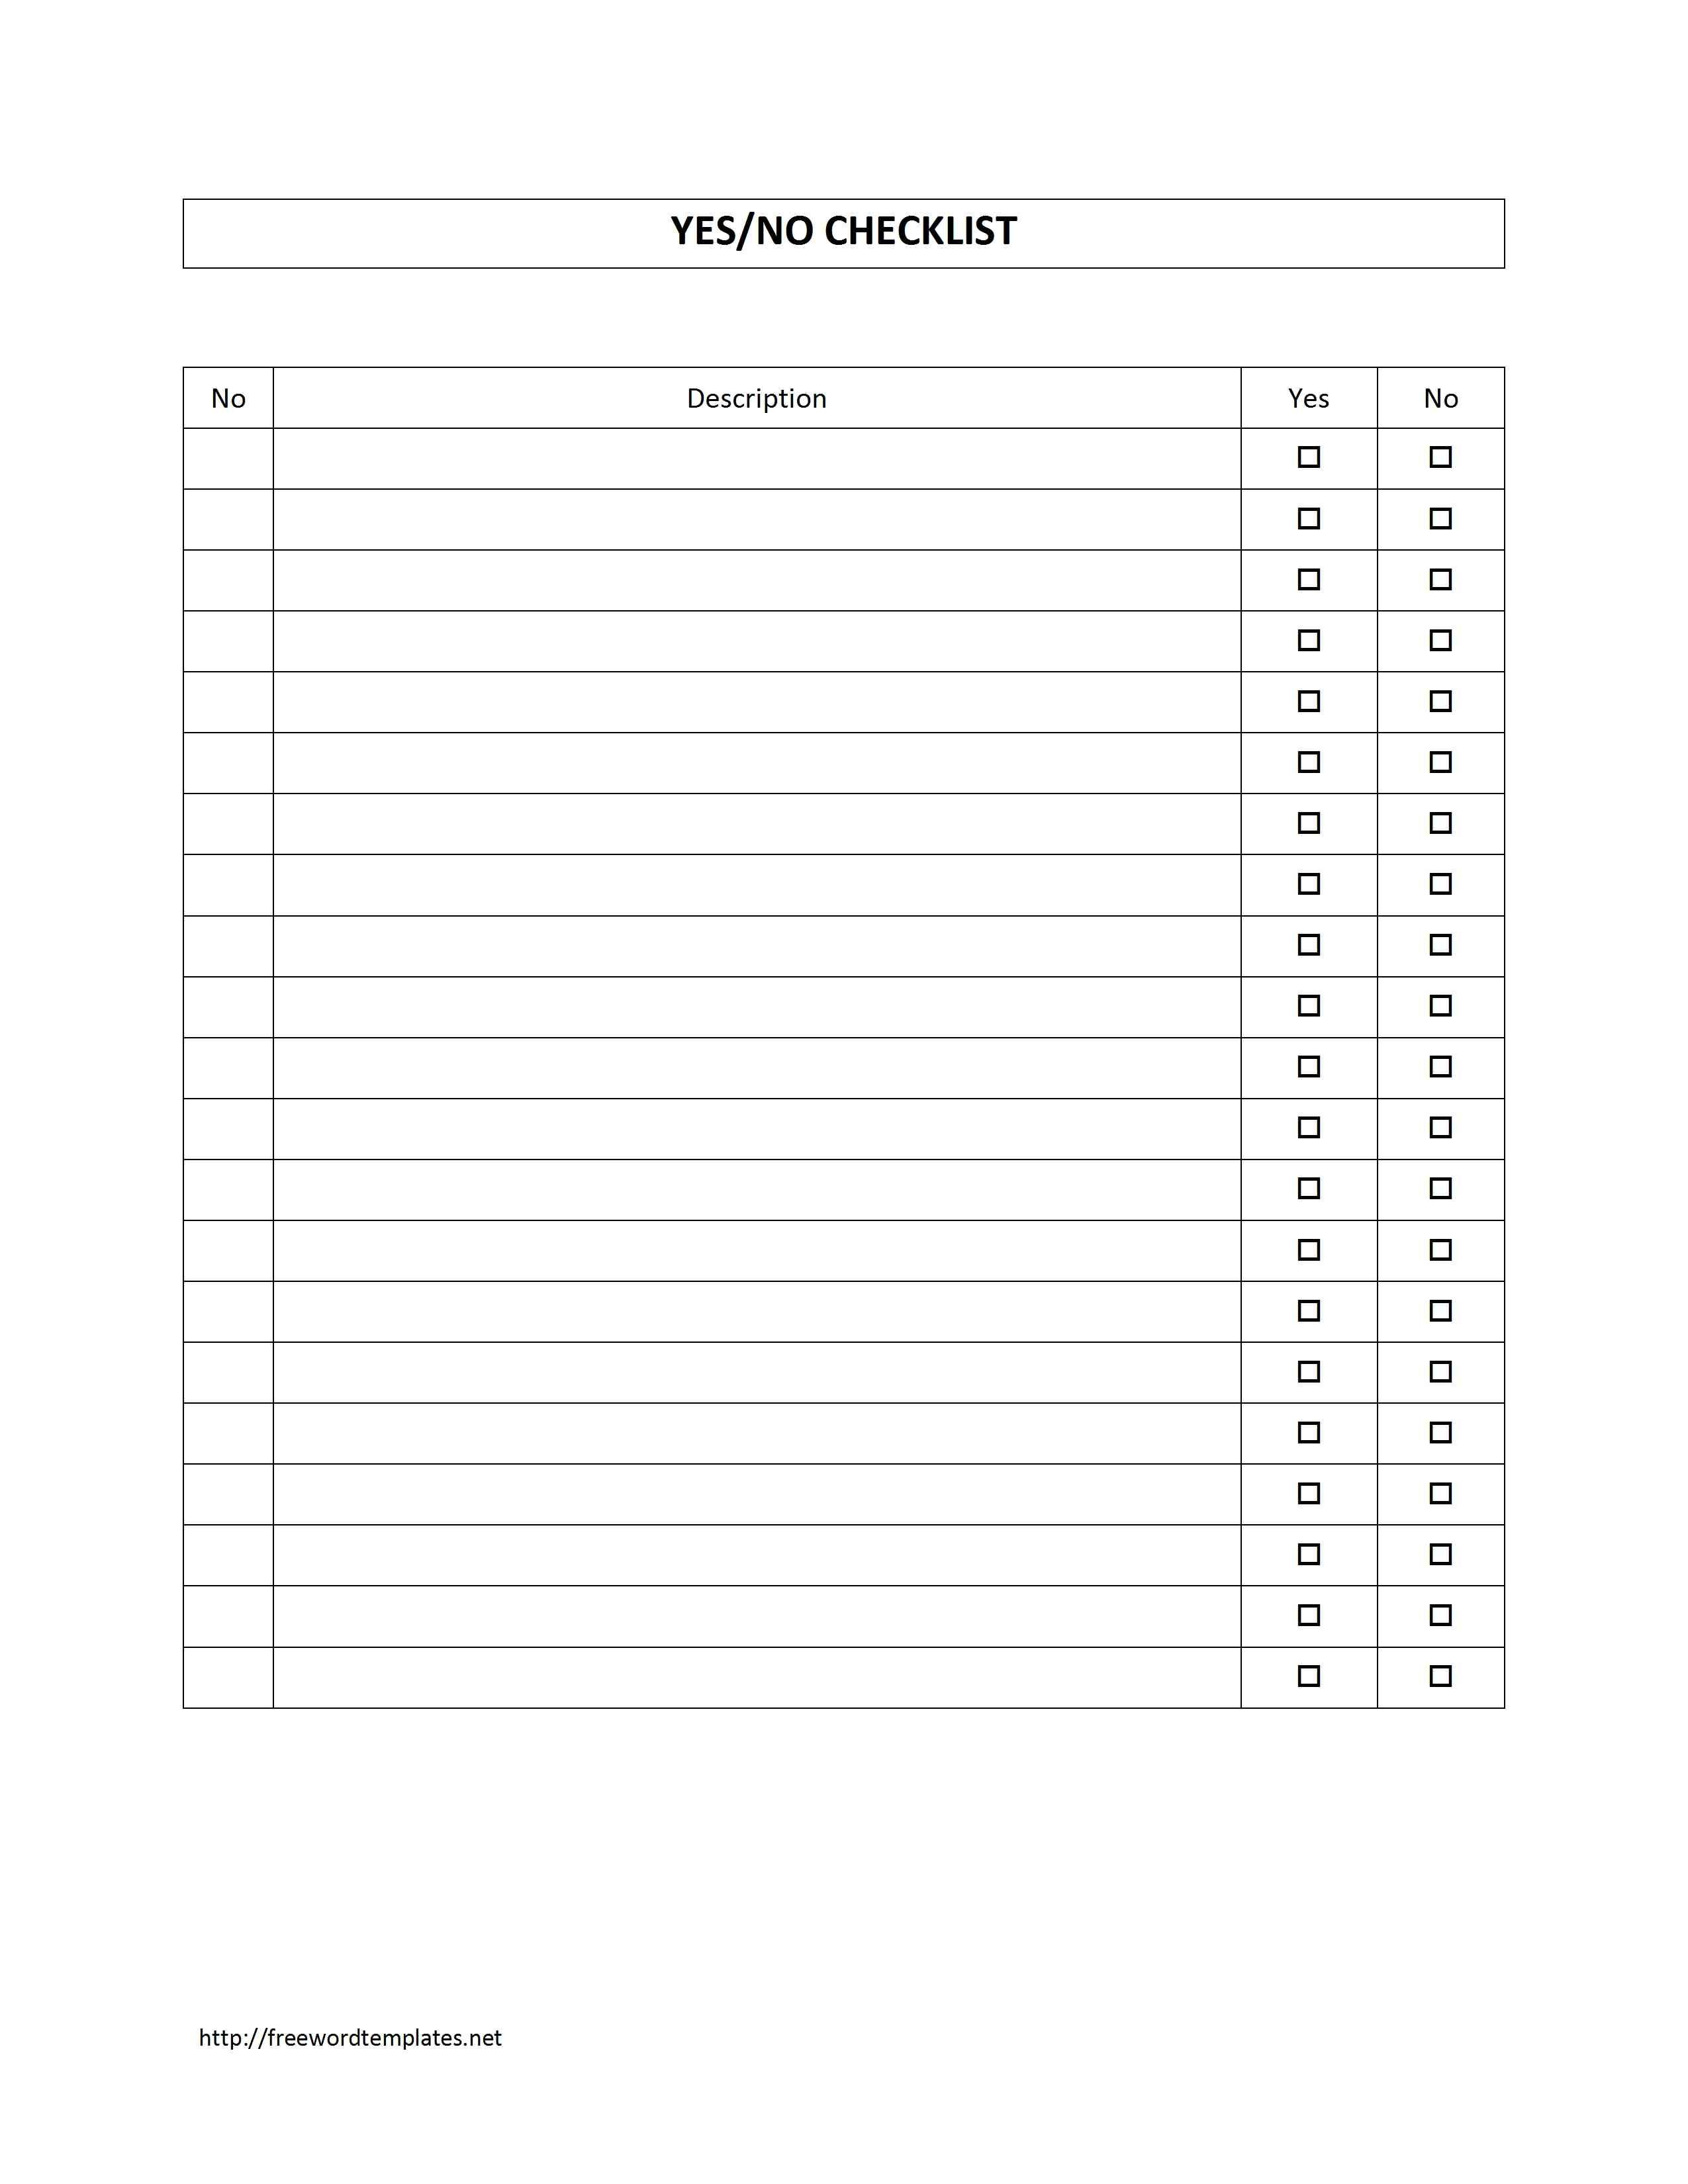 Survey Sheet With Yes/no Checklist Template | Free Microsoft Regarding Fact Sheet Template Microsoft Word